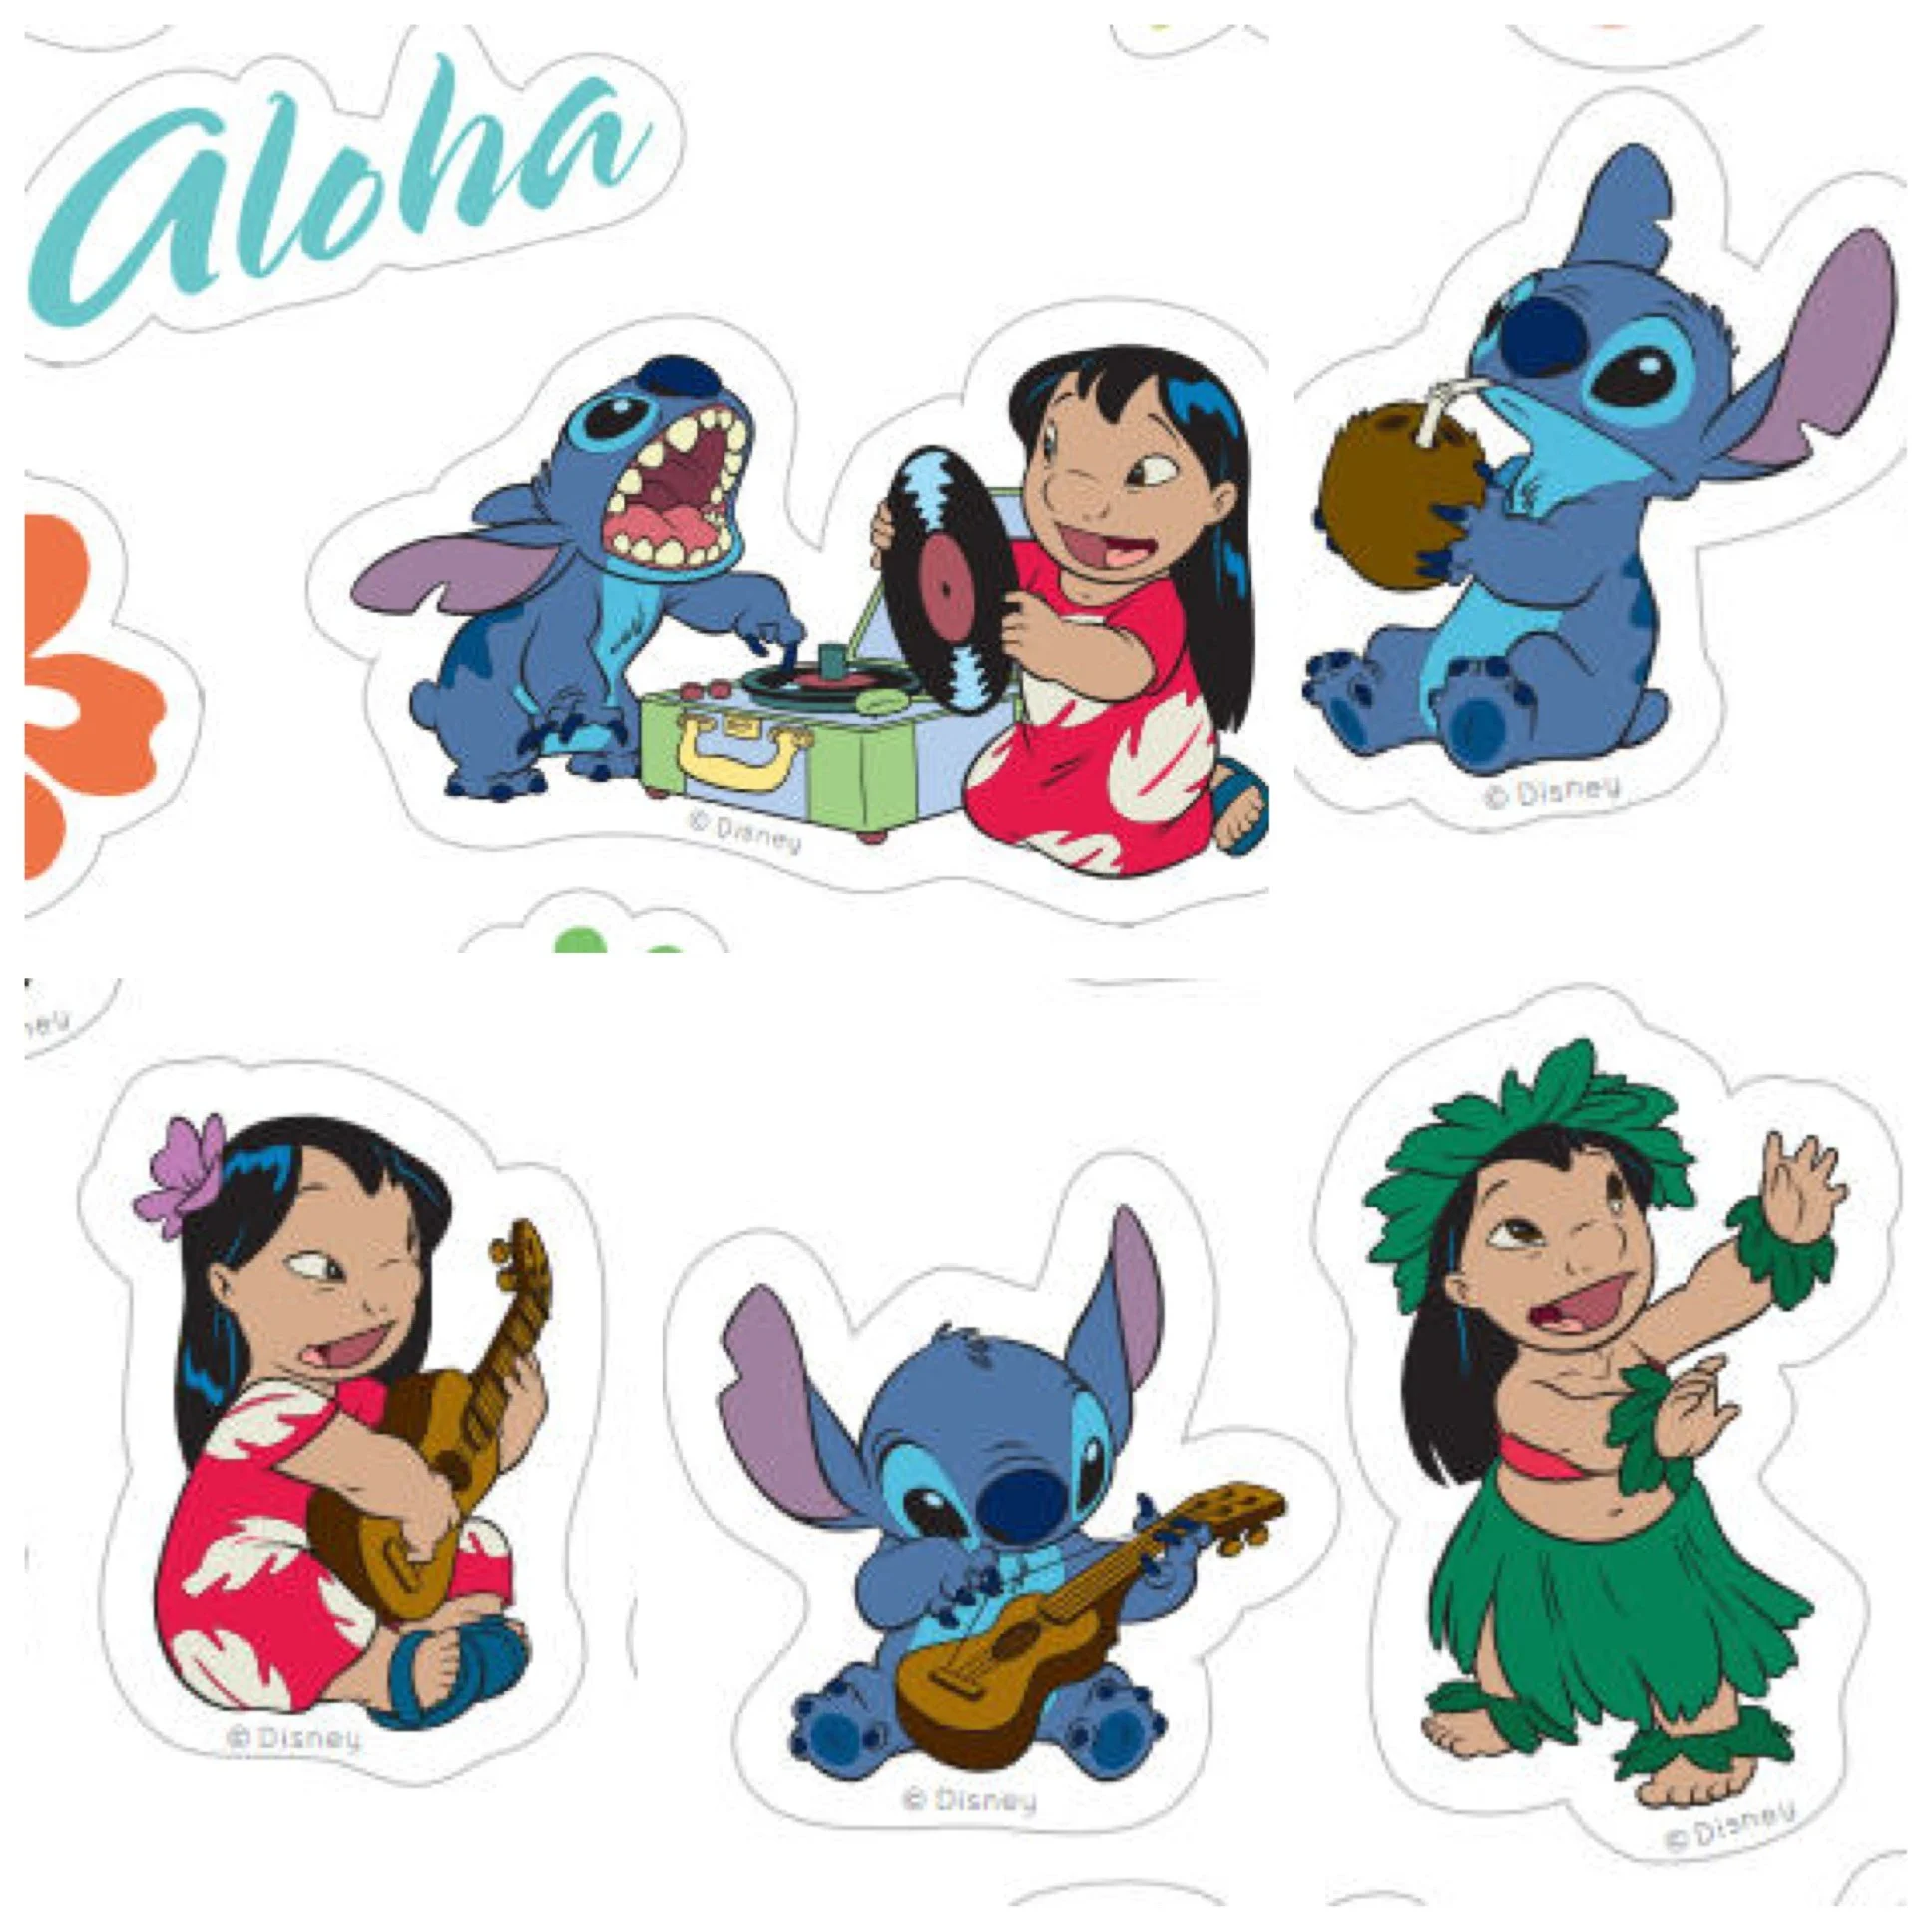 Print and share these adorable Lilo Stitch stickers from home